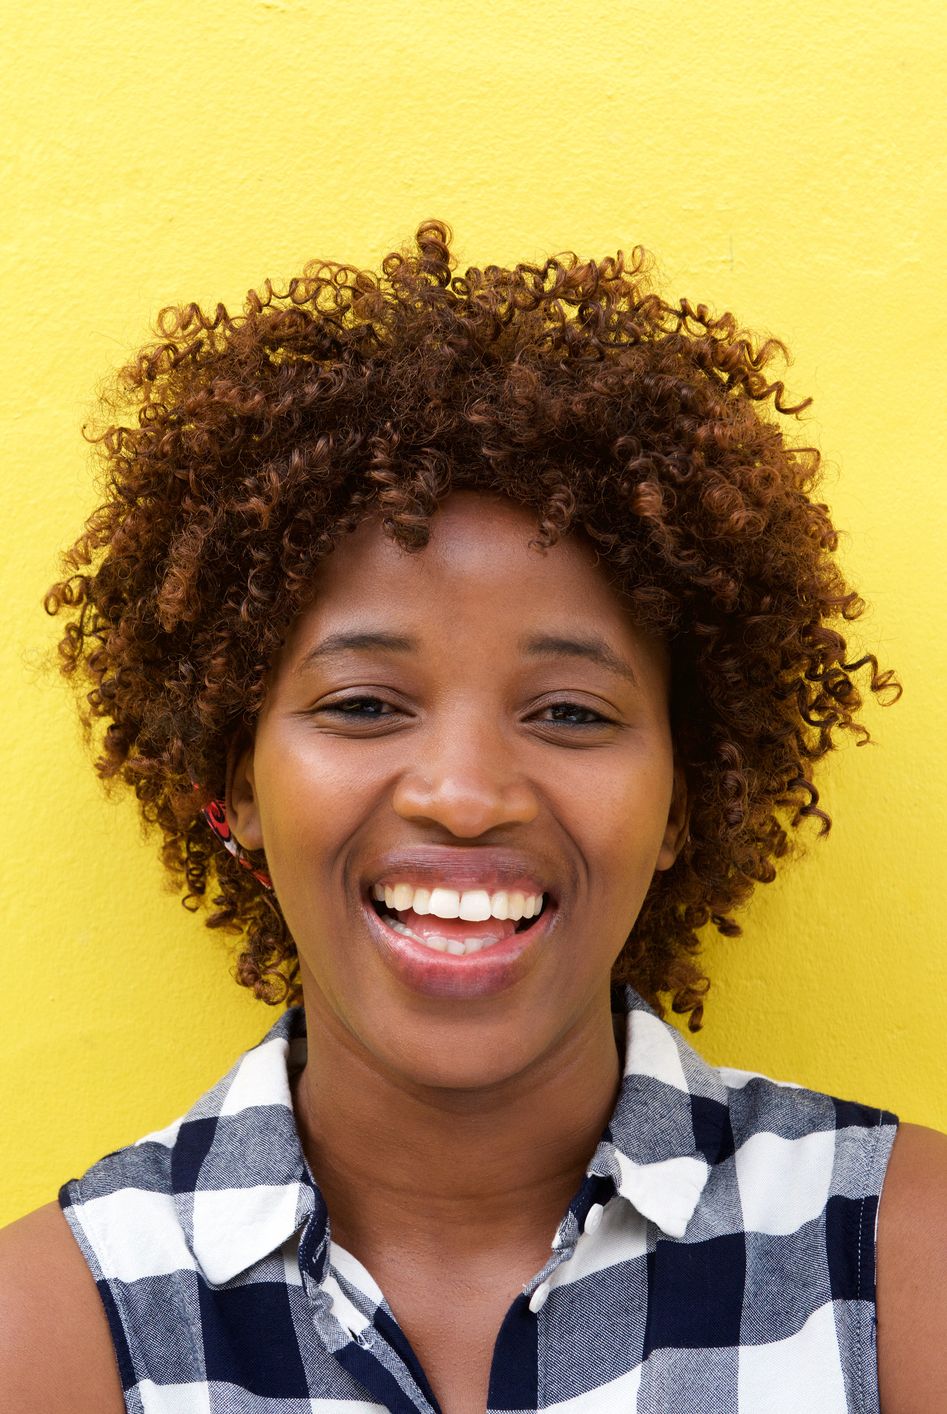 african lady laughing against yellow wall